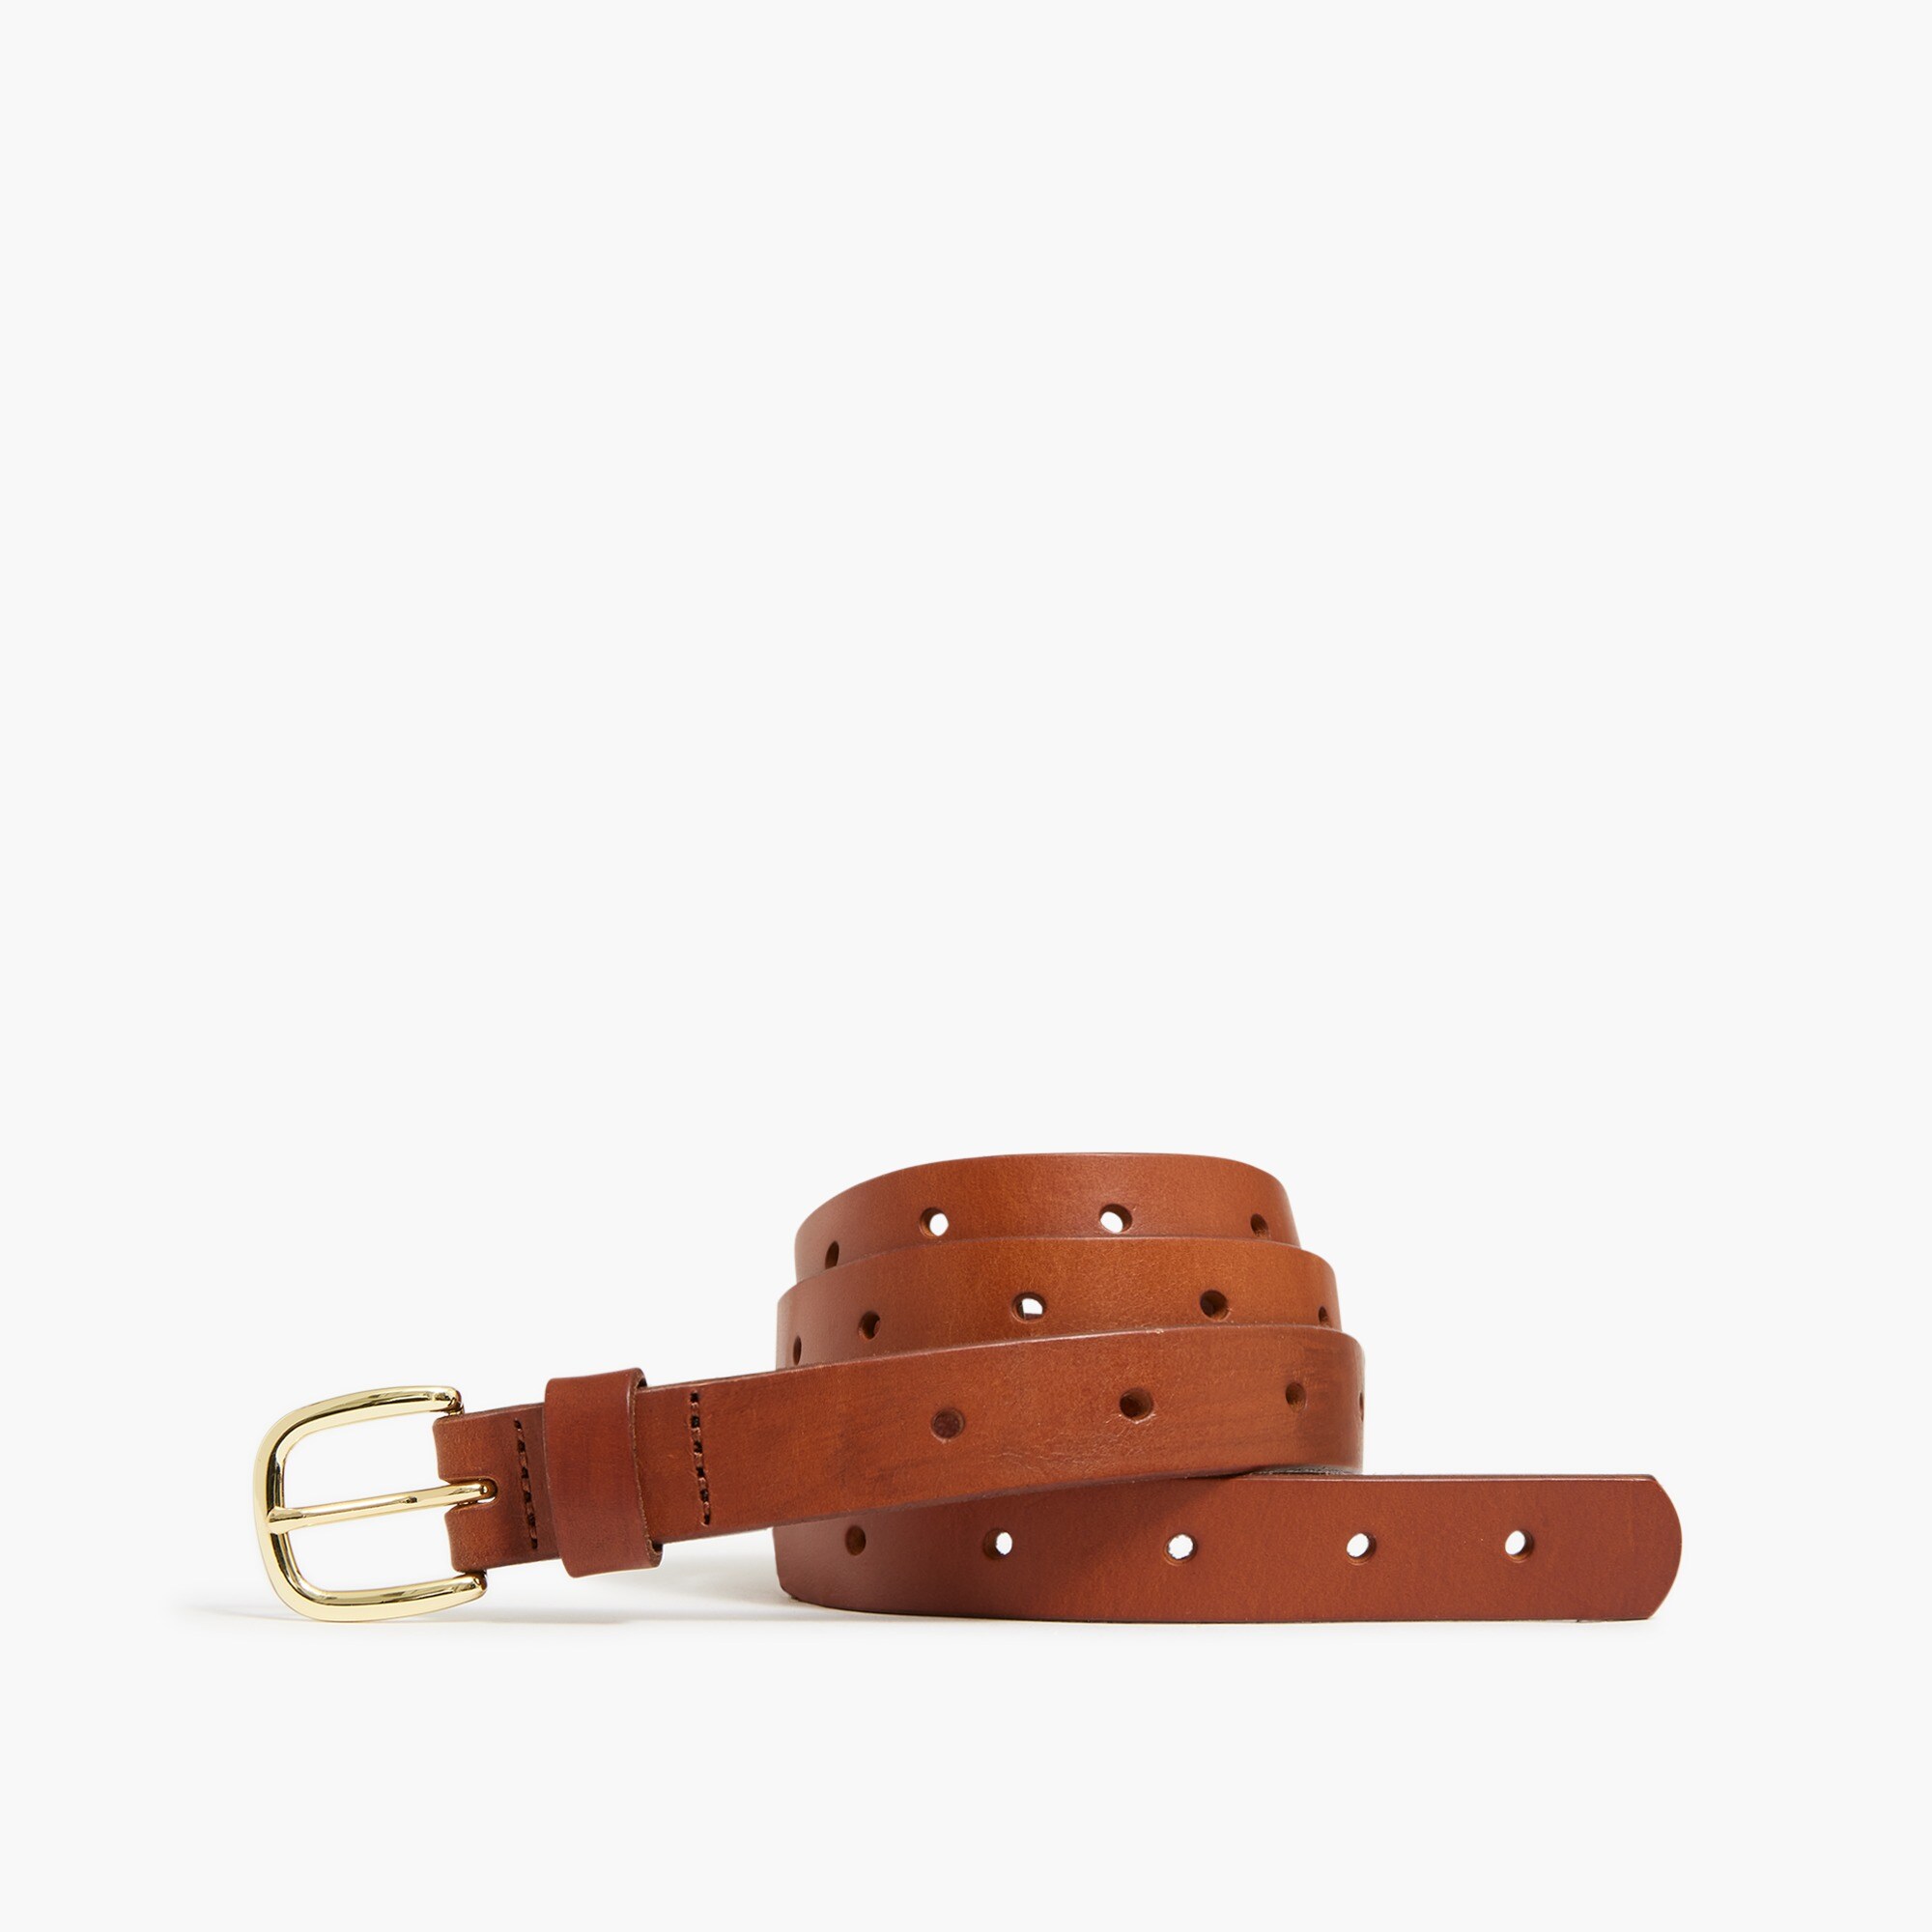  Leather perforated belt